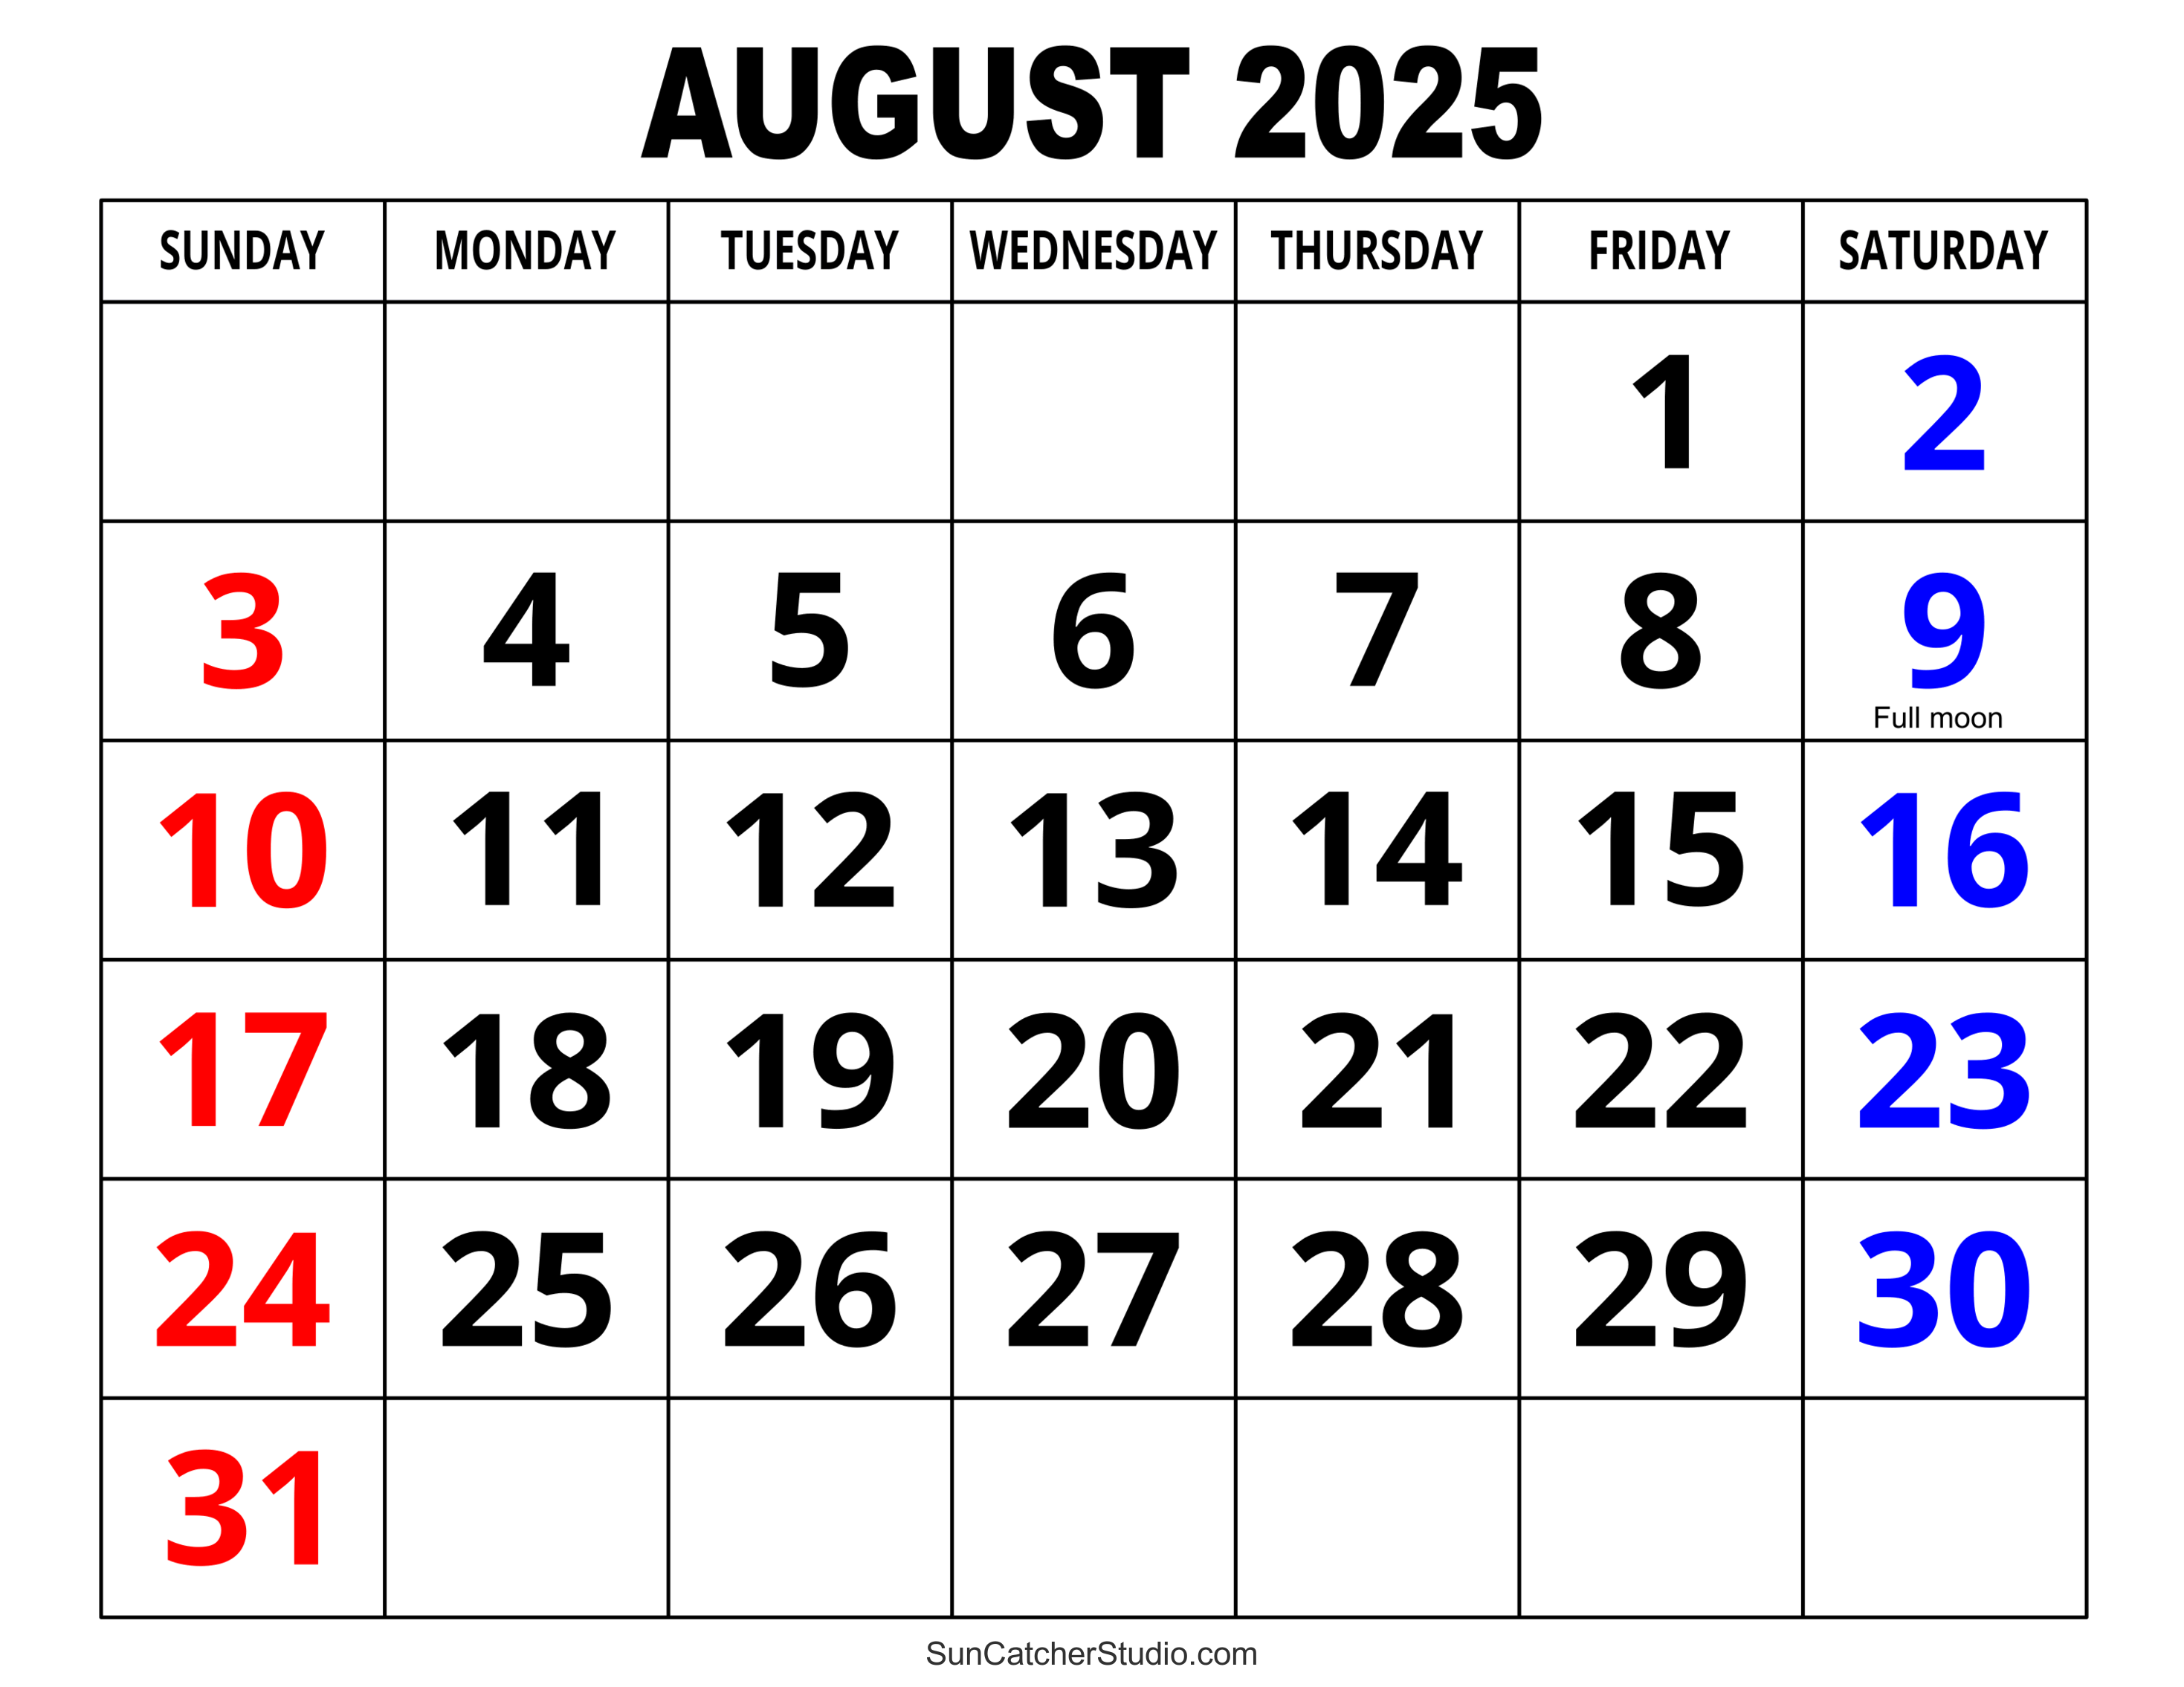 August 2025 Calendar (Free Printable) – DIY Projects, Patterns, Monograms, Designs, Templates